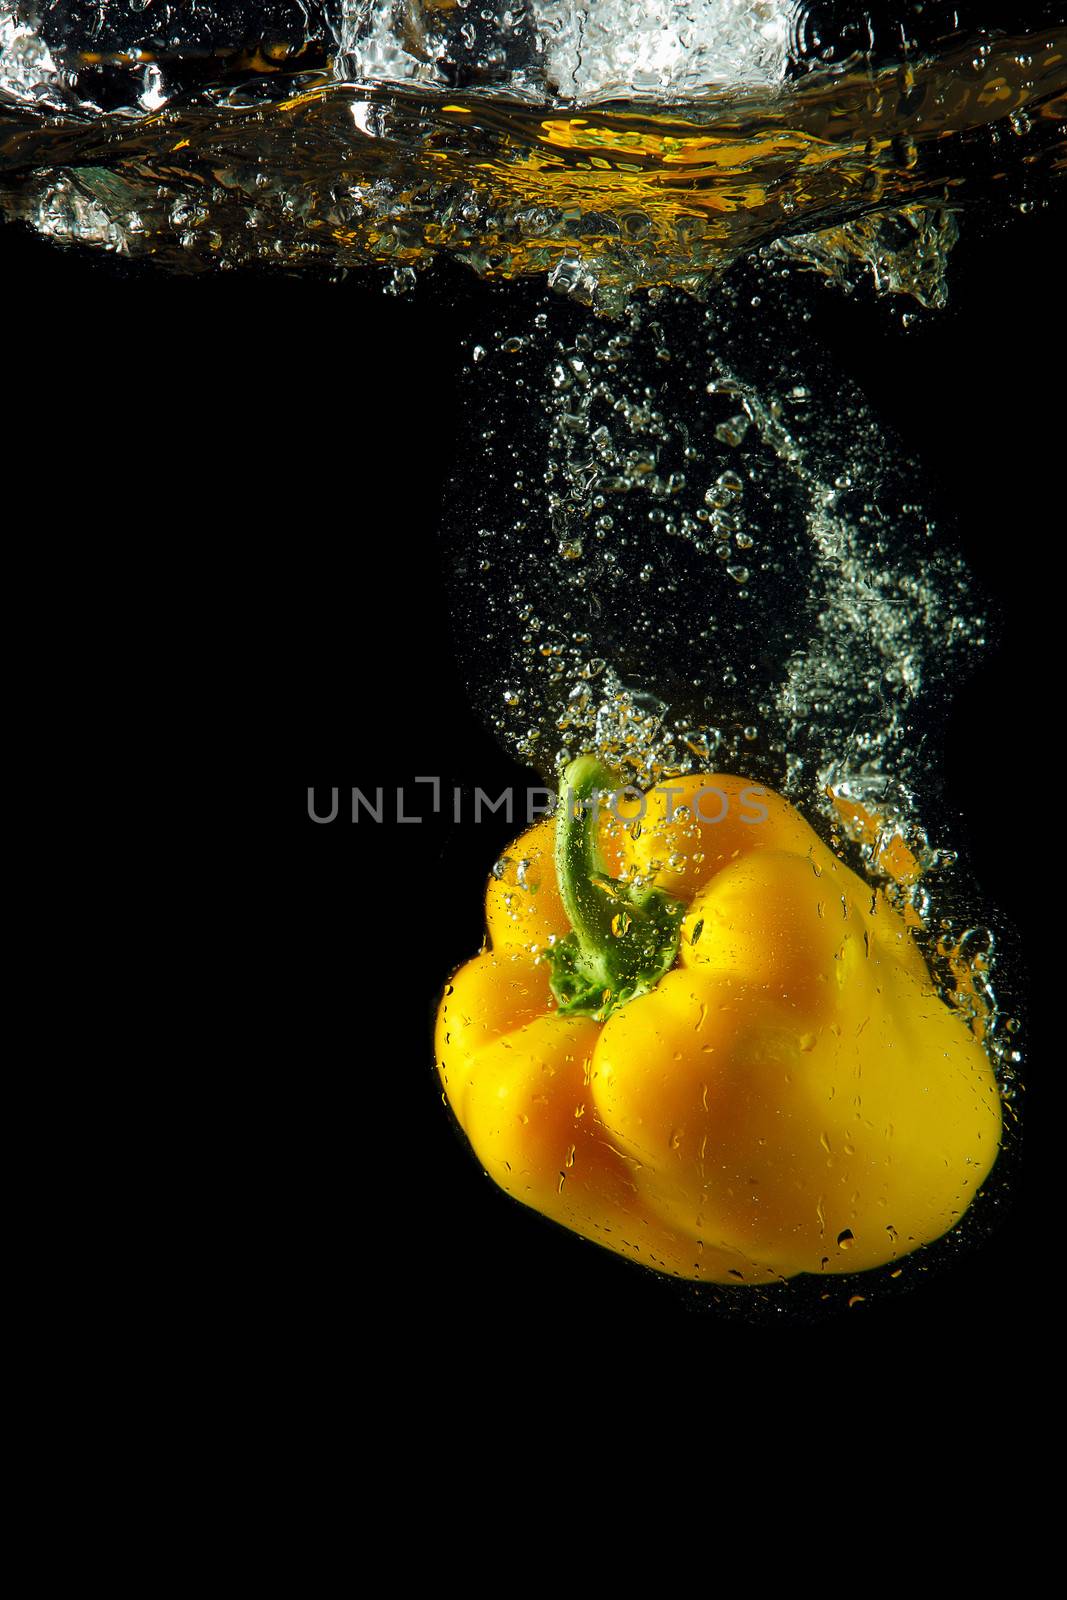 sweet yellow pepper by sergey_nivens